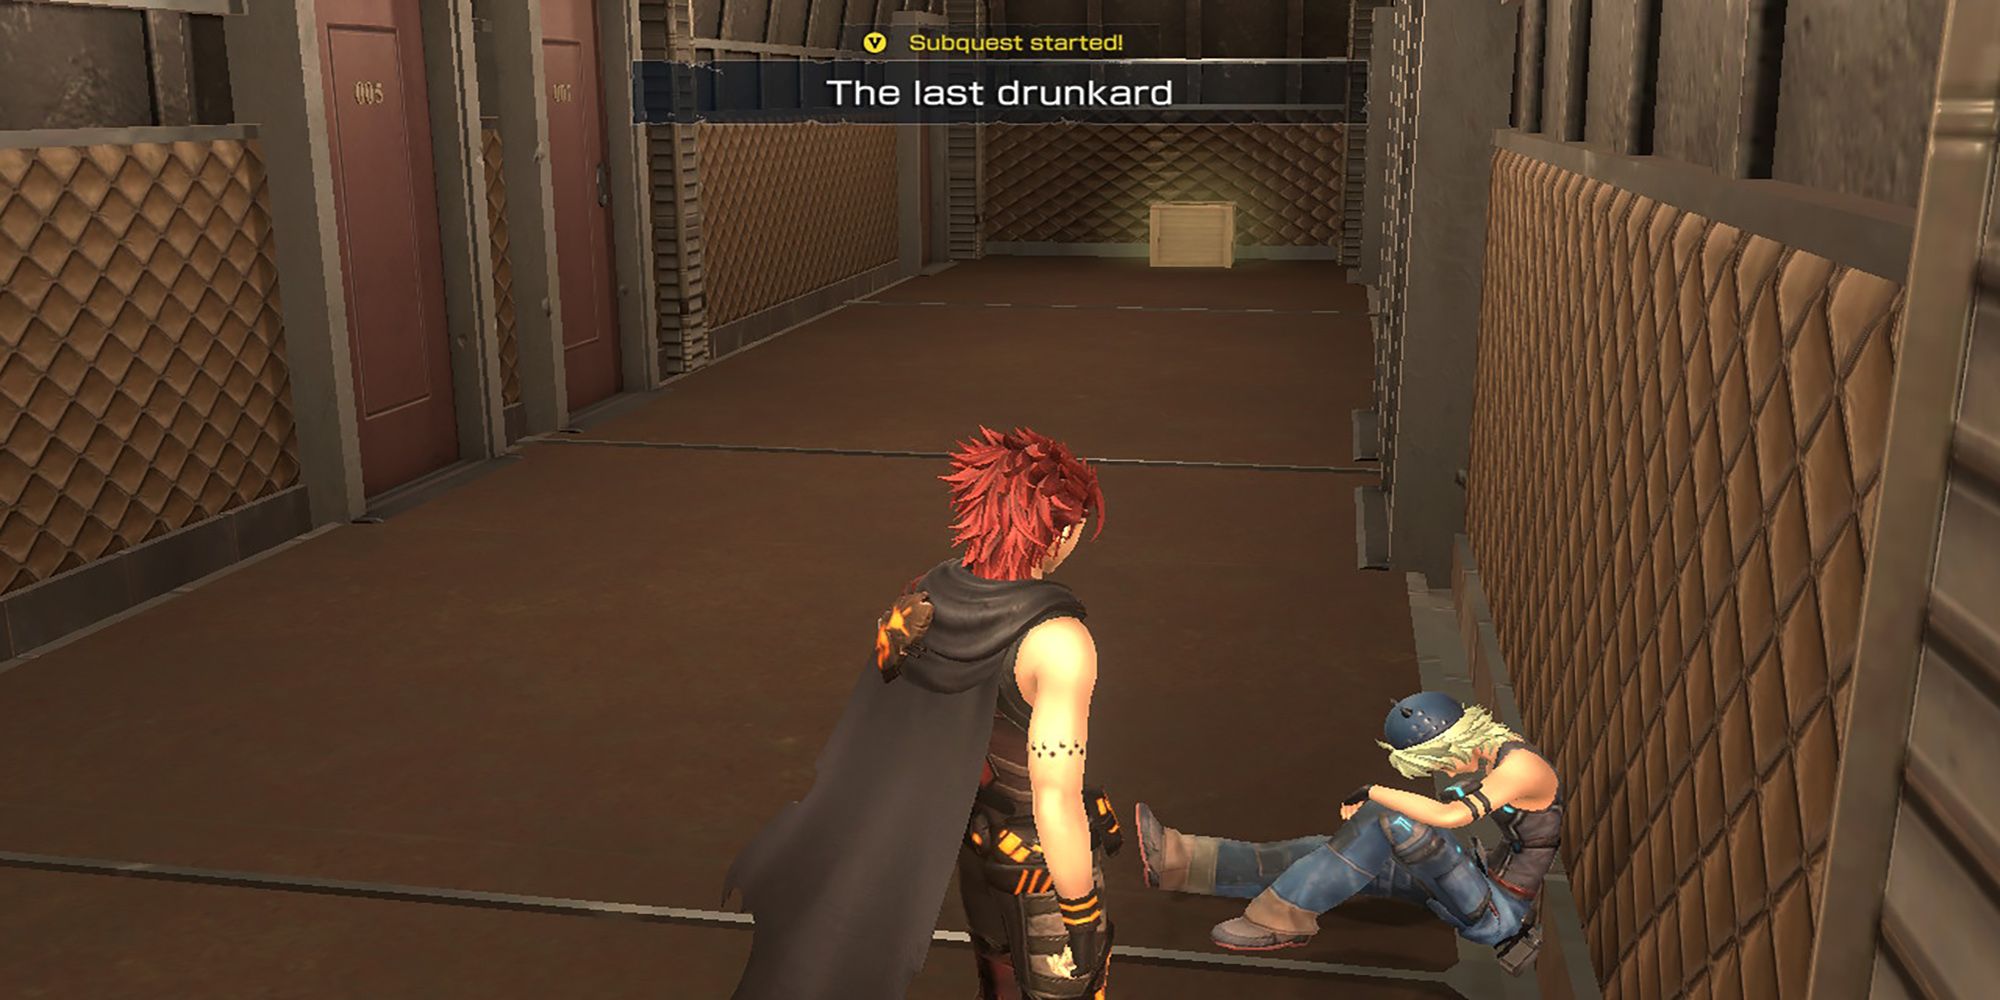 Talis approaches an intoxicated Yokky sitting in a hallway at Iron Base in Metal Max Xeno Reborn.